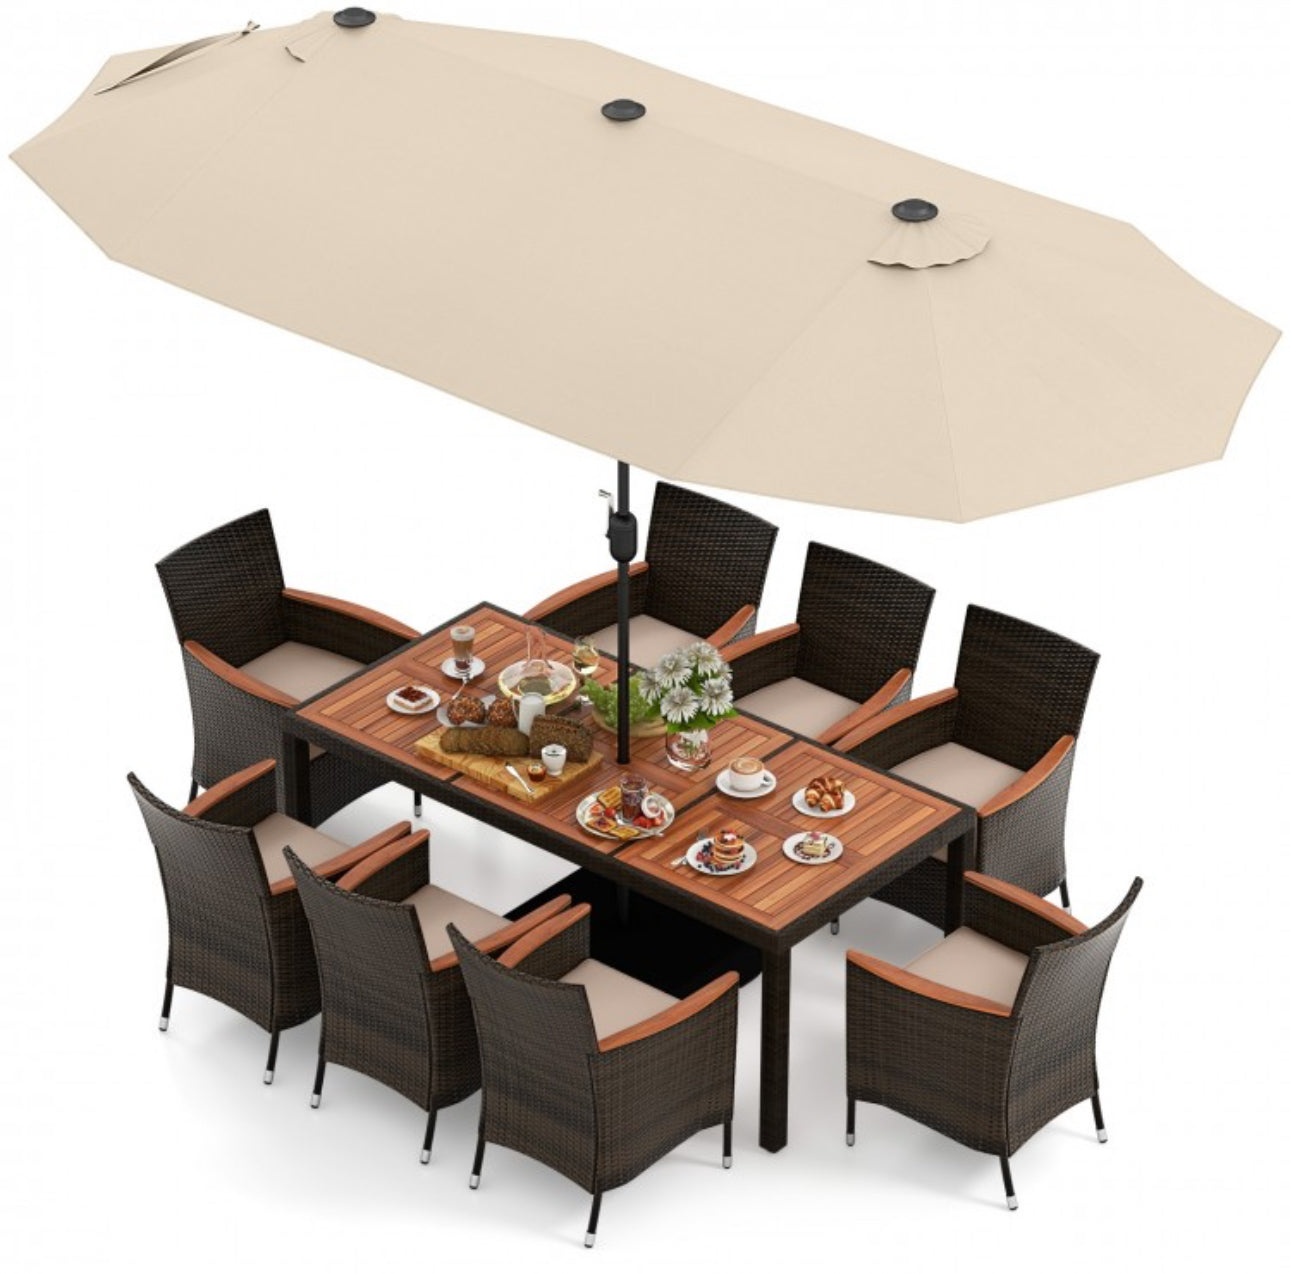 Heavy Duty Outdoor Patio 10-Piece Dining Set With 15 Feet Double-Sided Twin Patio Umbrella, Rustic Acadia Wood, Wicker, Rattan, Very Comfortable